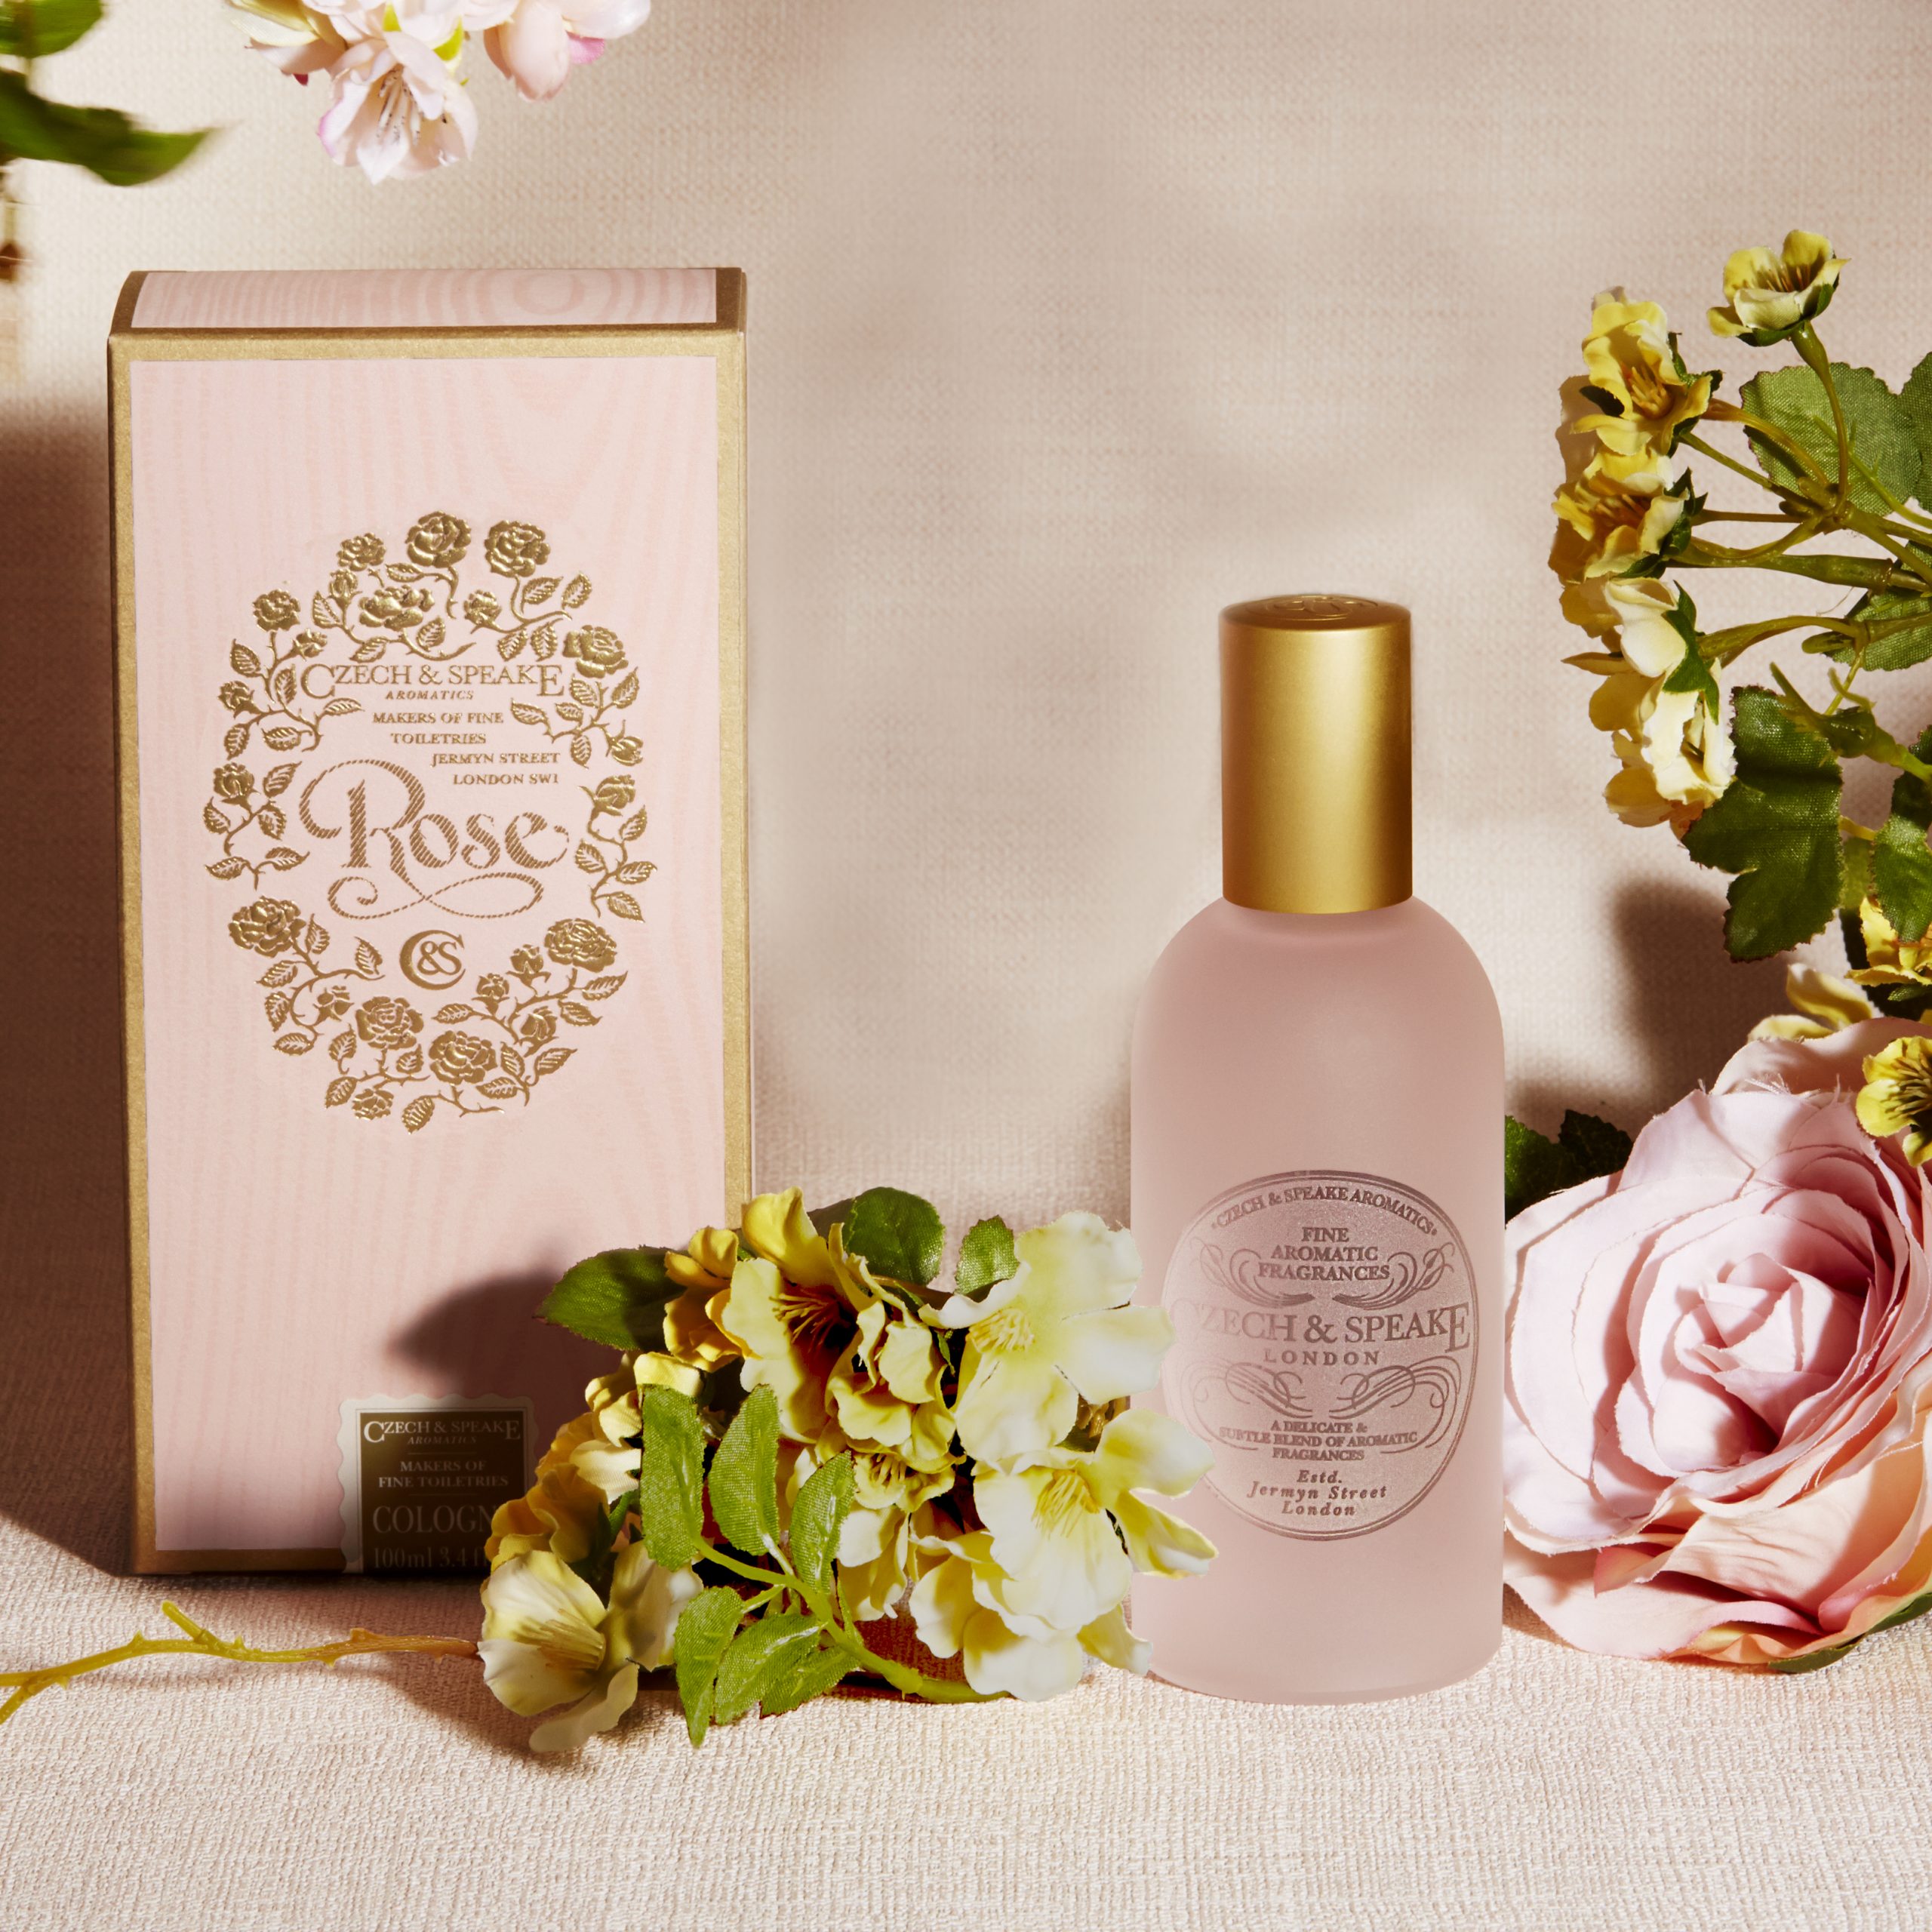 Rose Cologne bottle and packaging on pink linen background with roses